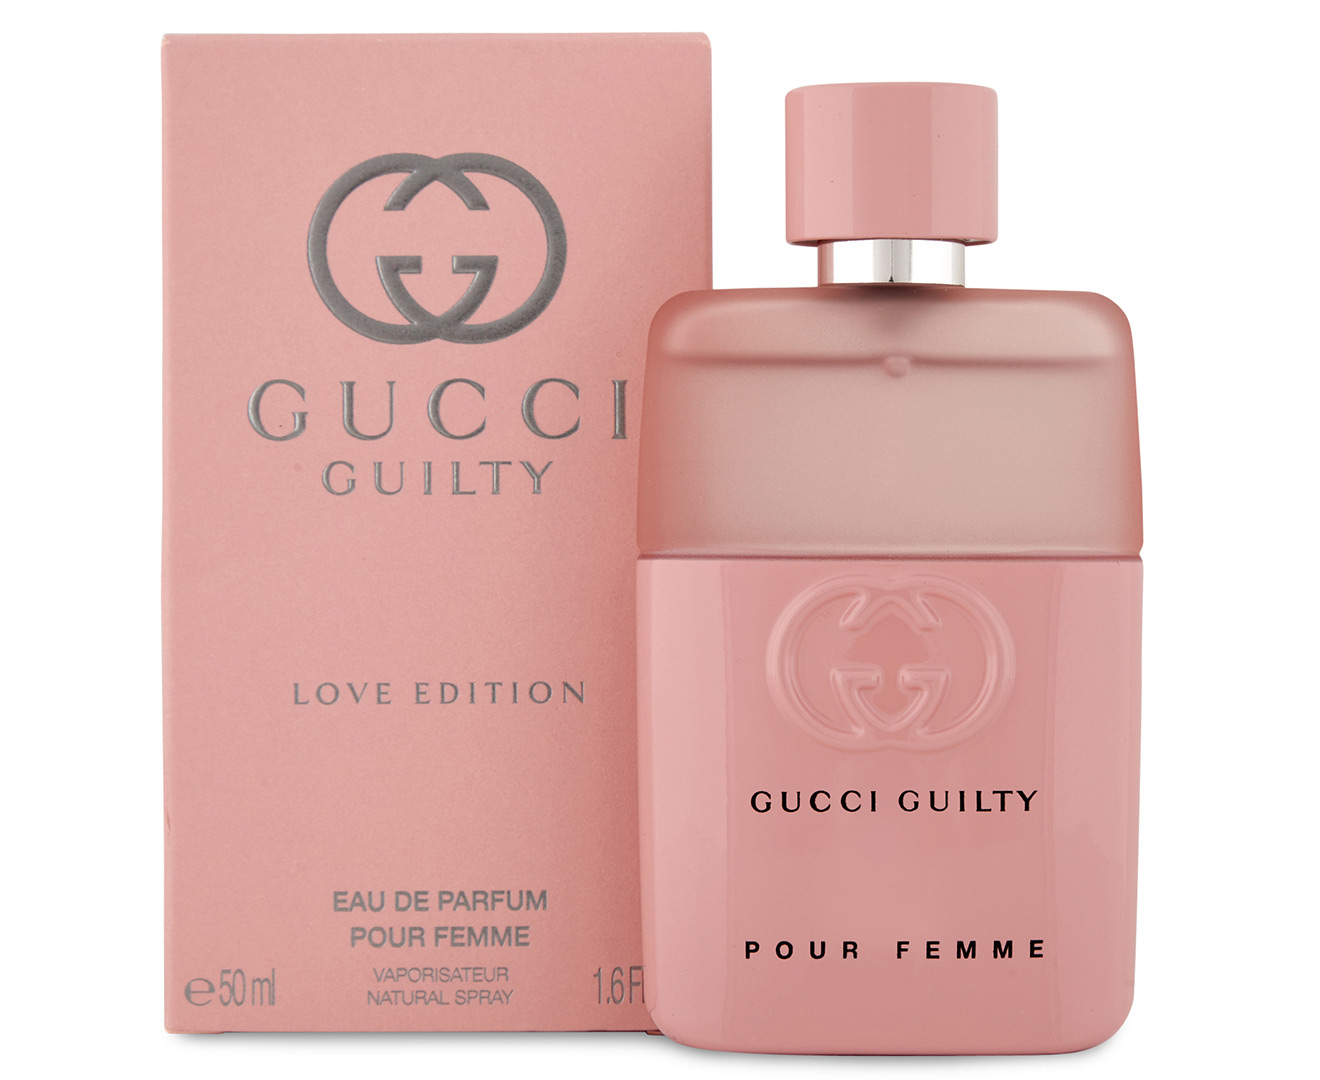 Gucci Guilty Love Edition For Women EDP Perfume 50mL 